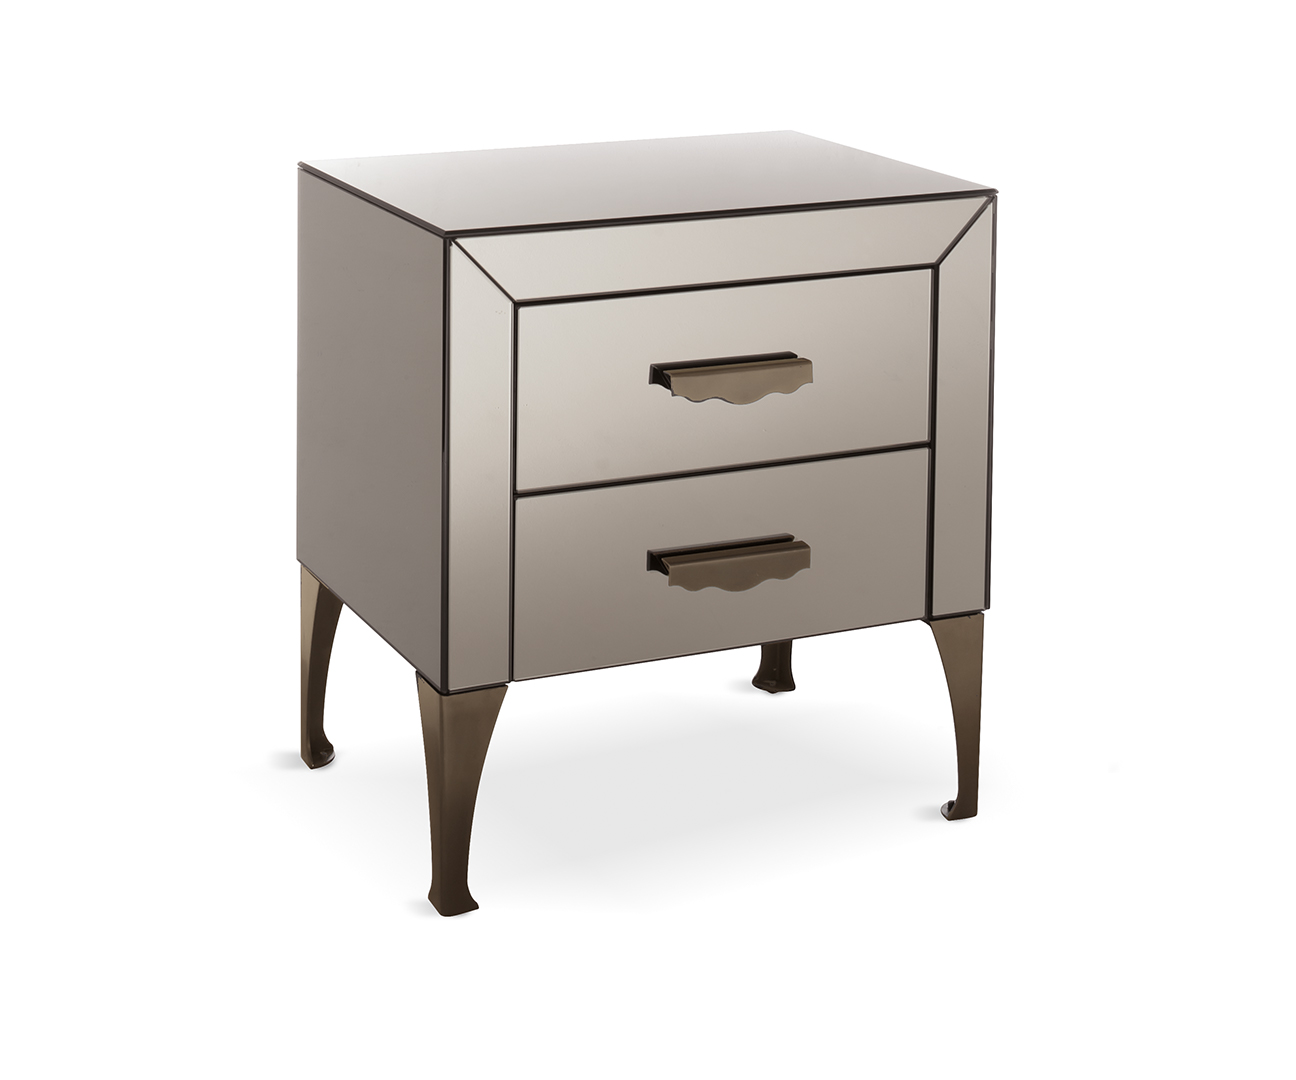 Adone bedside table - Cantori